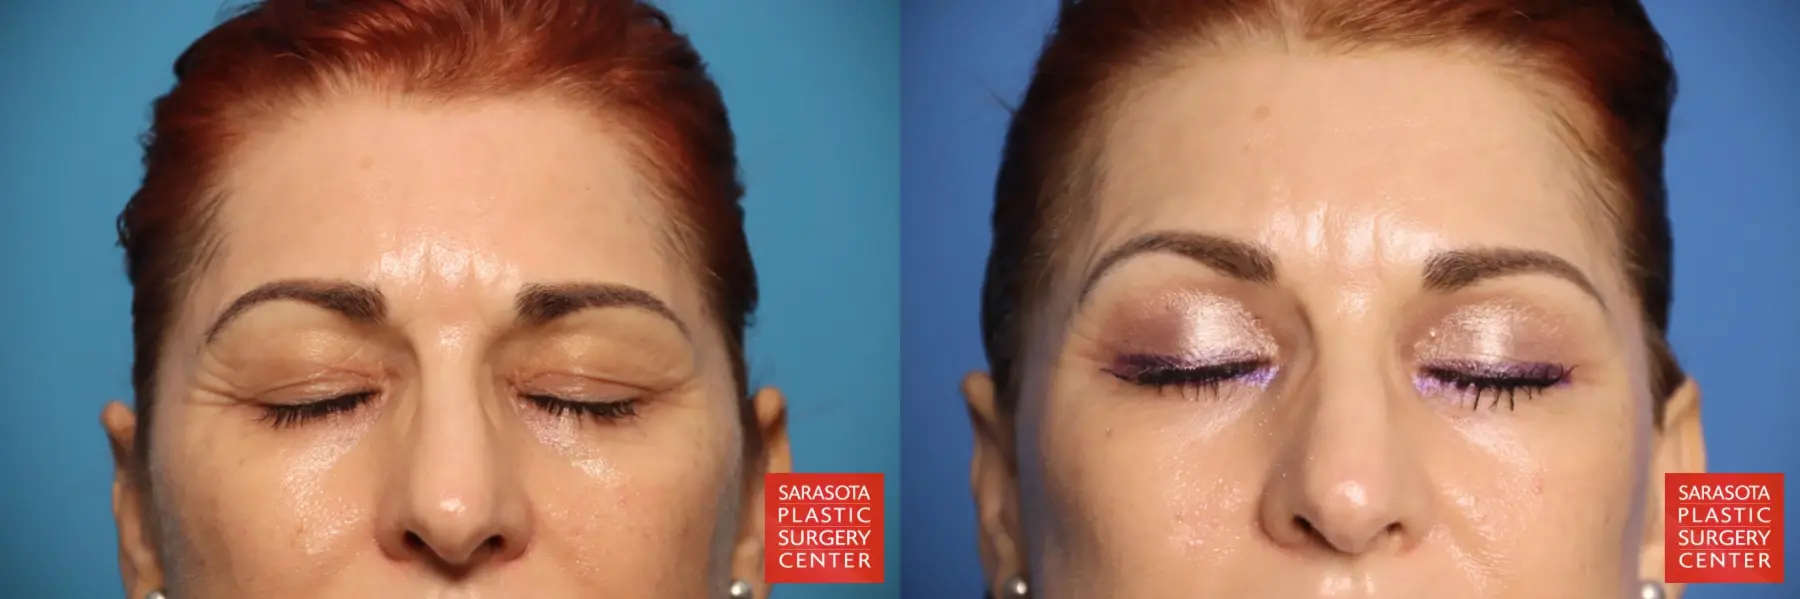 Brow Lift: Patient 3 - Before and After 3